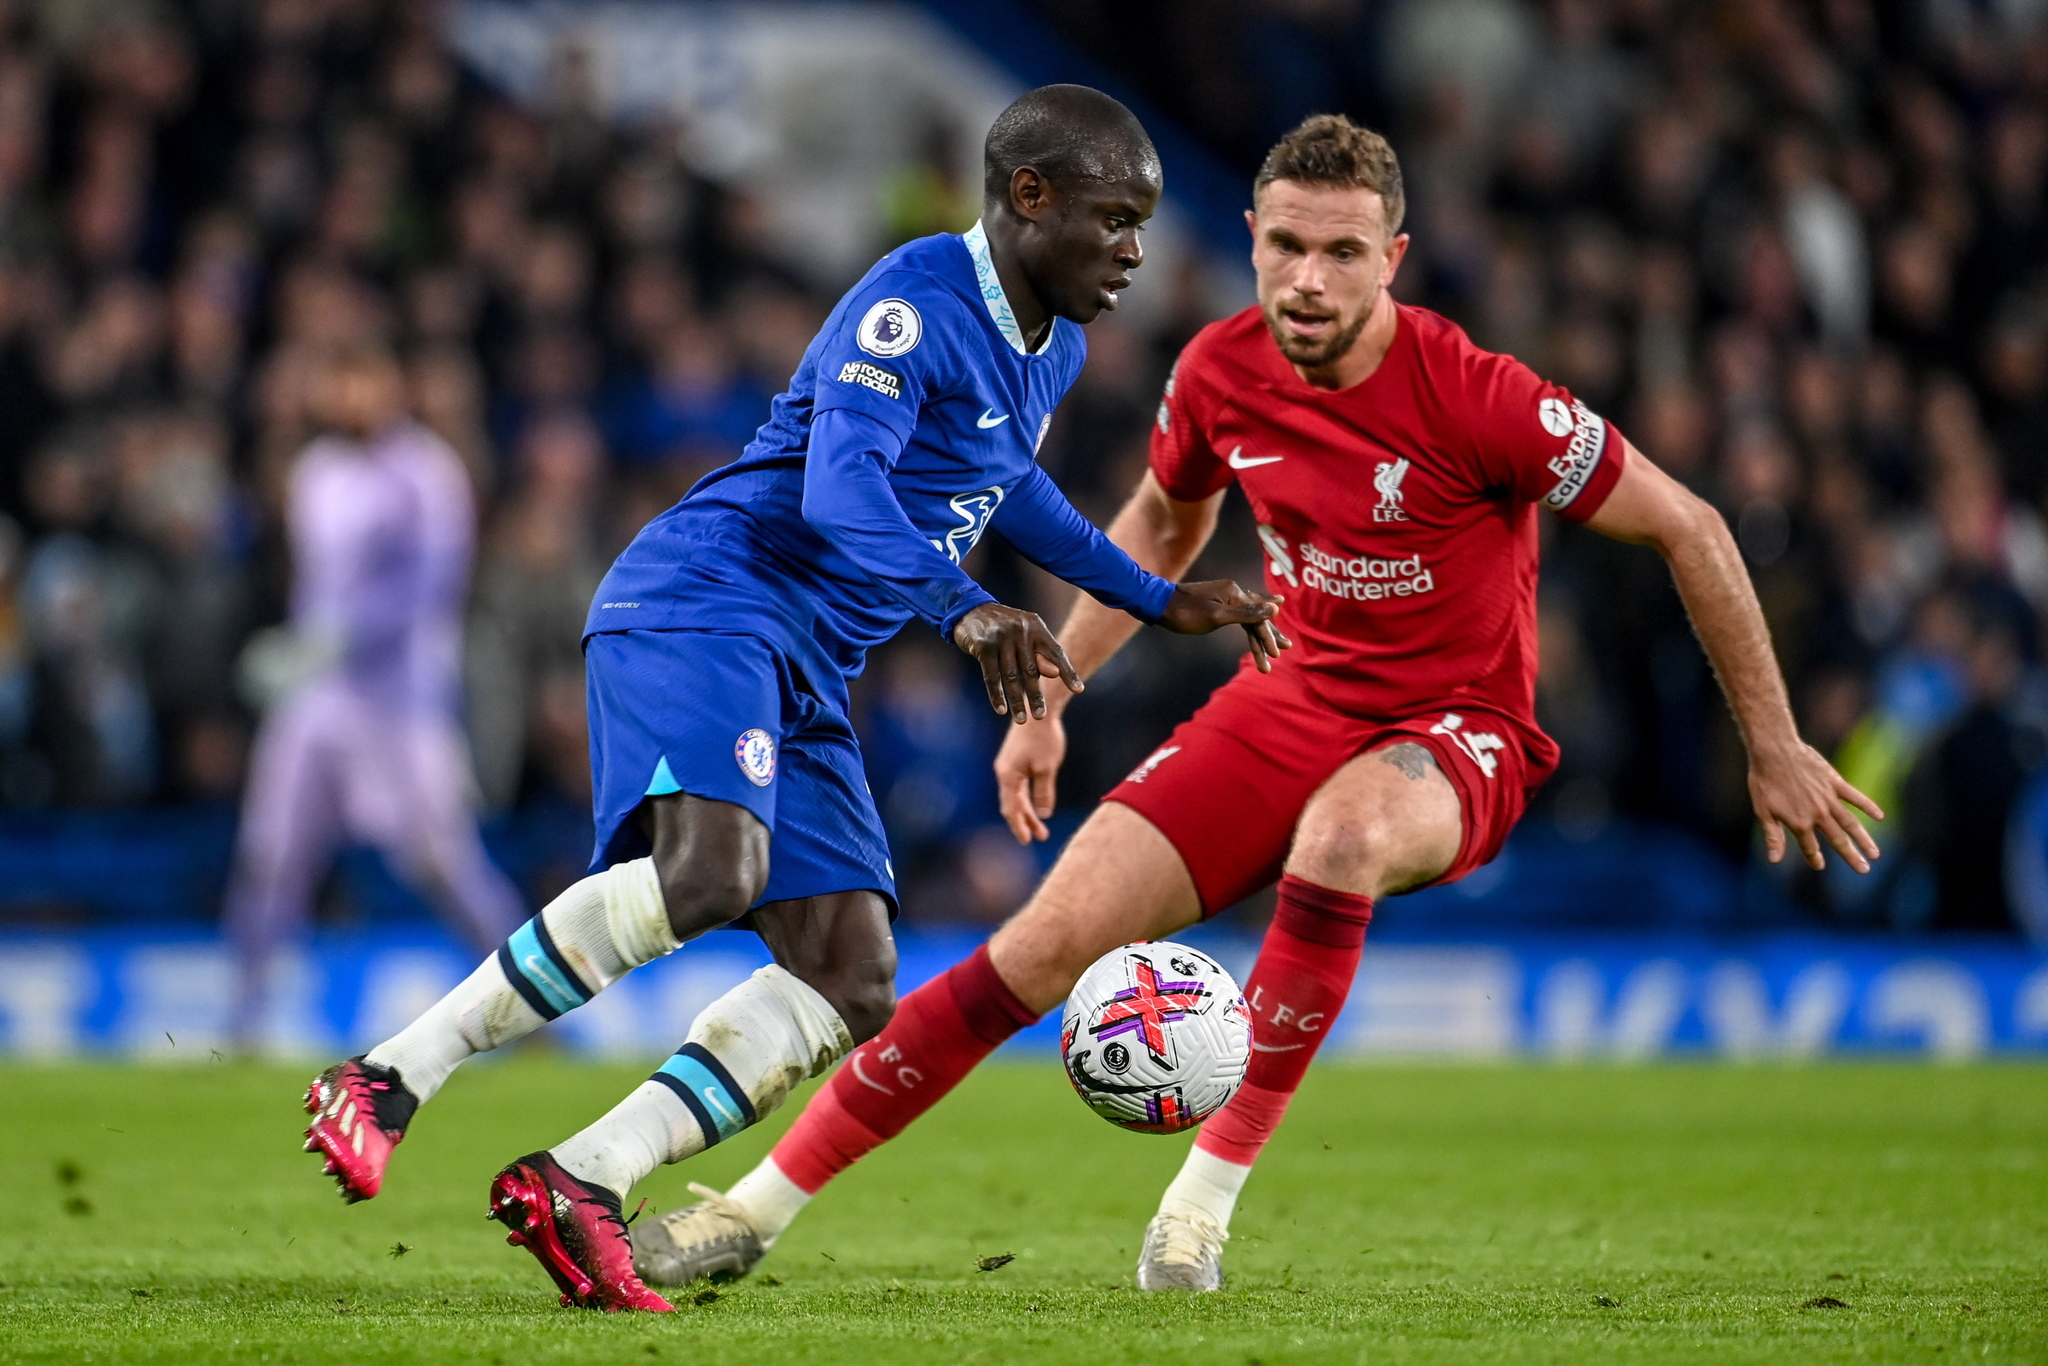 London (United Kingdom), 04/04/2023.- N'Golo Kante of  lt;HIT gt;Chelsea lt;/HIT gt; (L) in action against Jordan Henderson of Liverpool (R) during the English Premier League soccer match between  lt;HIT gt;Chelsea lt;/HIT gt; FC and Liverpool FC in London, Britain, 04 April 2023. (Jordania, Reino Unido, Londres) EFE/EPA/ANDY RAIN EDITORIAL USE ONLY. No use with unauthorized audio, video, data, fixture lists, club/league logos or 'live' services. Online in-match use limited to 120 images, no video emulation. No use in betting, games or single club/league/player publications